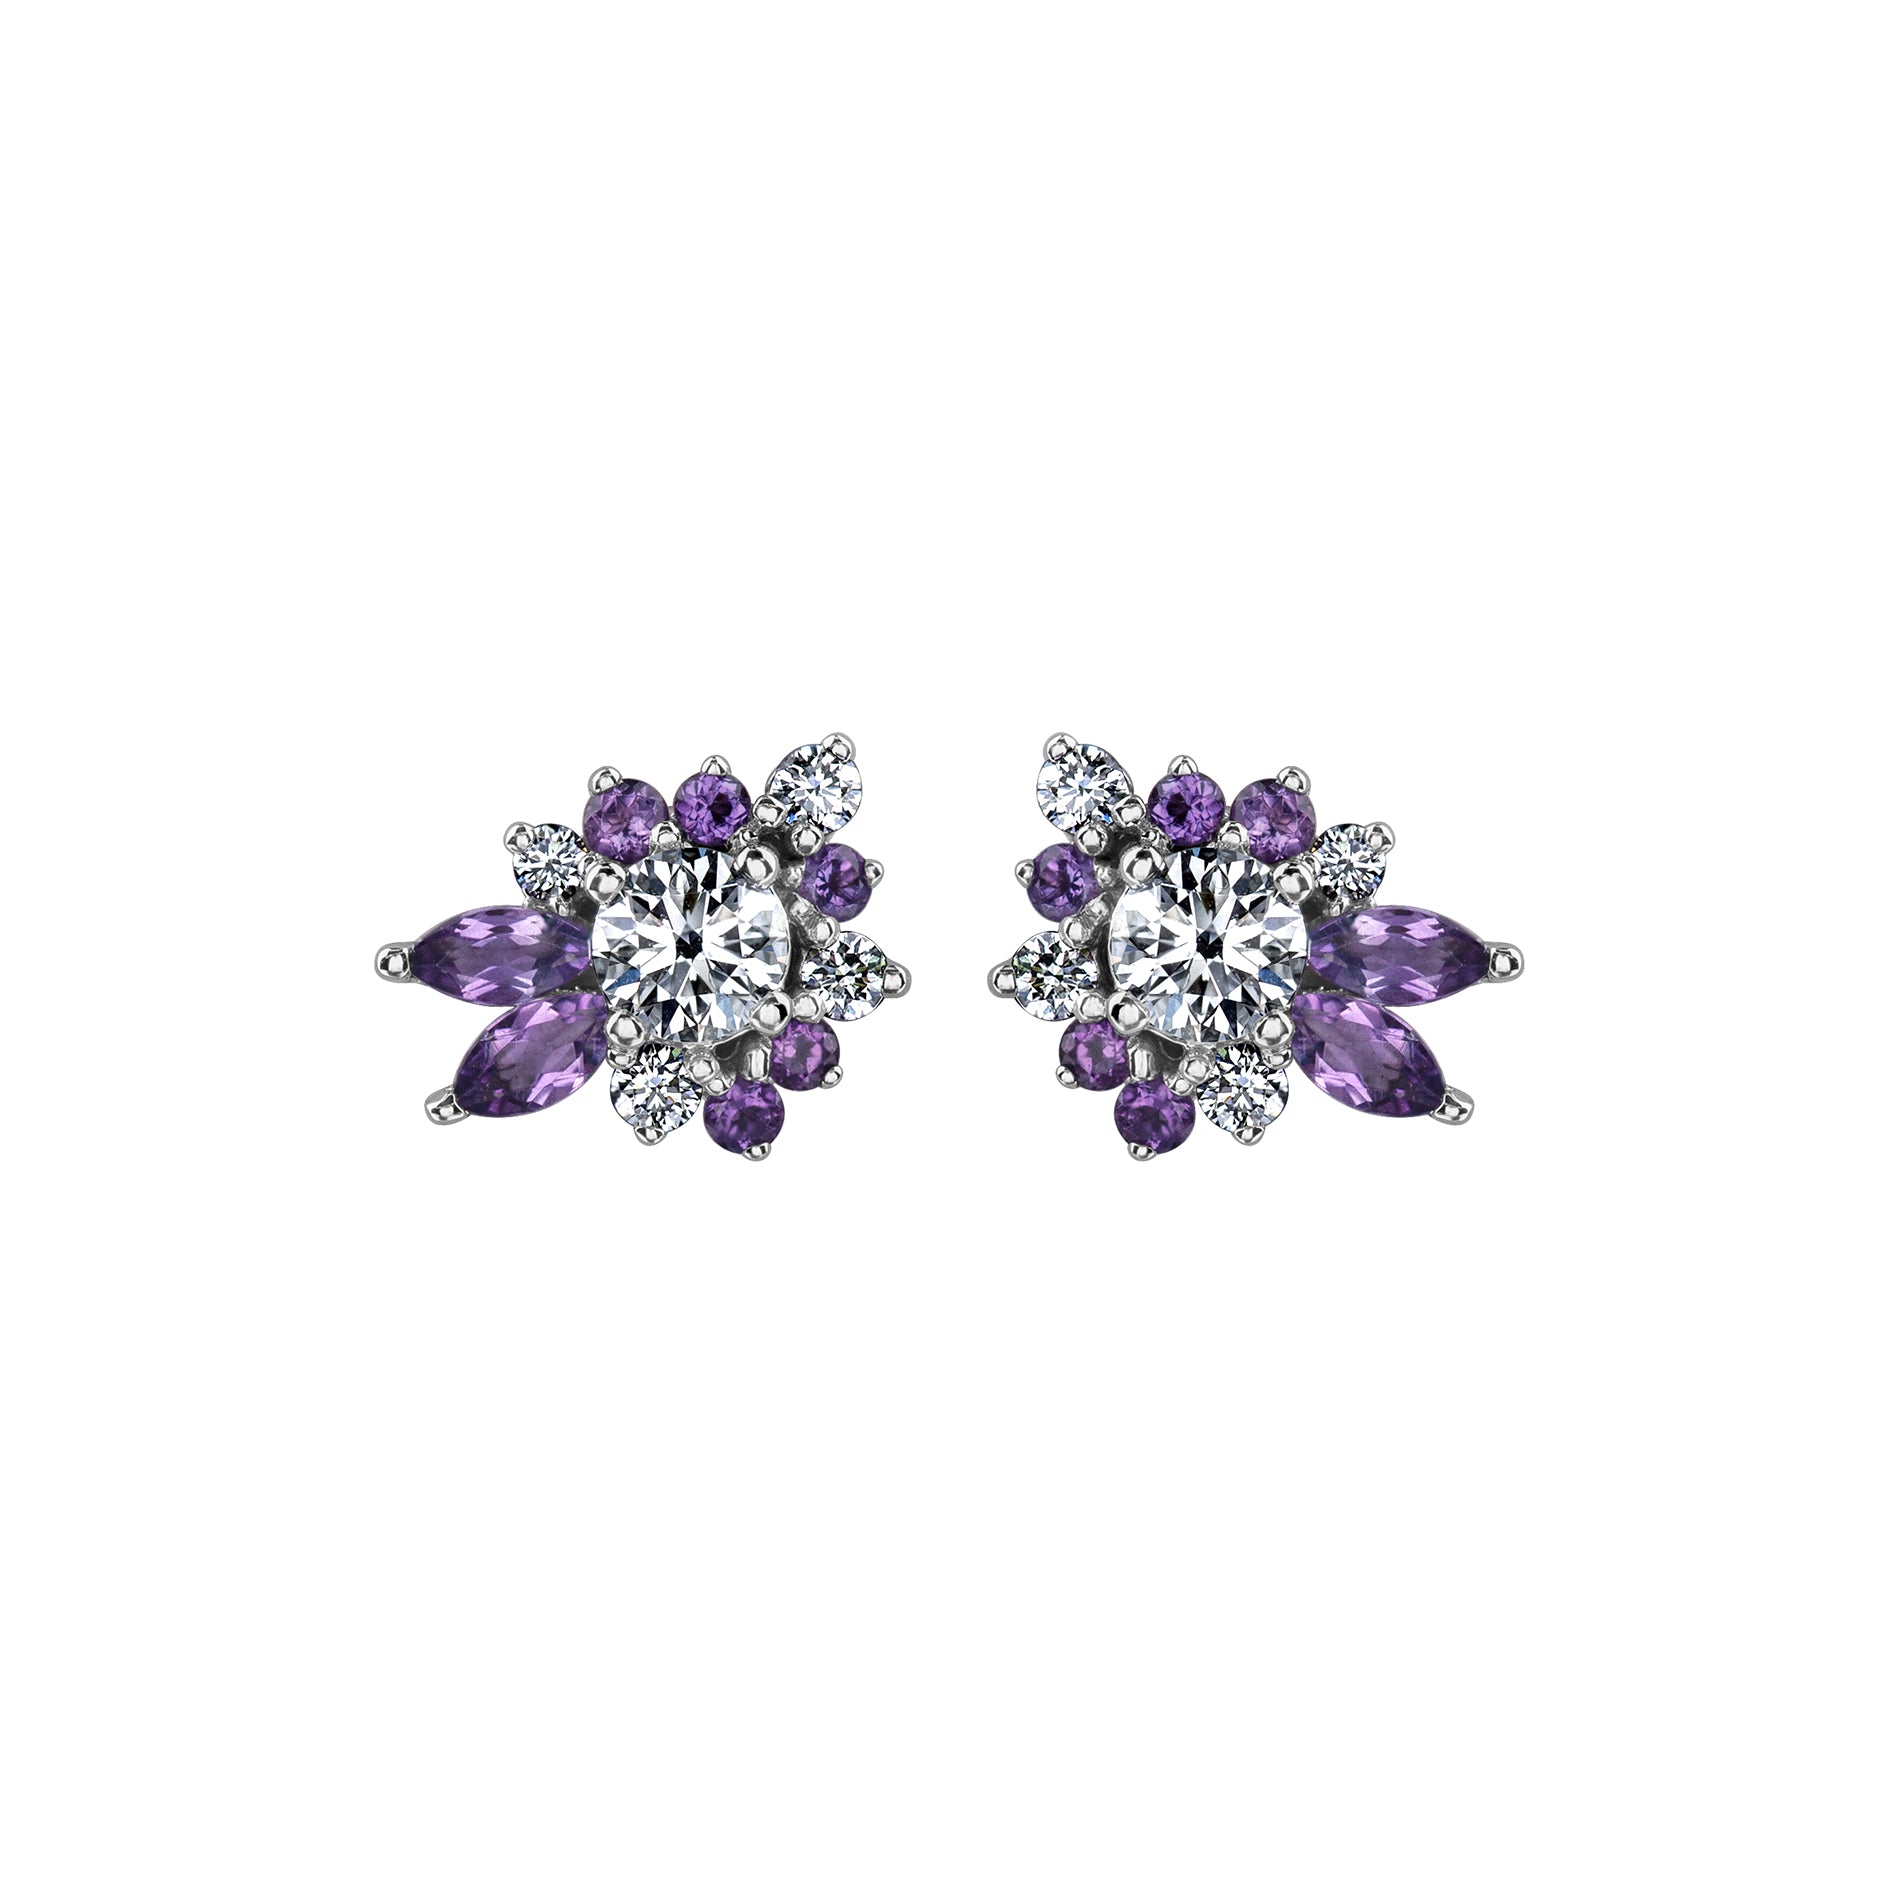 Crafted in 14KT Canadian Certified Gold these diamond earrings feature a wildflower-inspired shape set with round brilliant cut Canadian diamonds and amethyst.